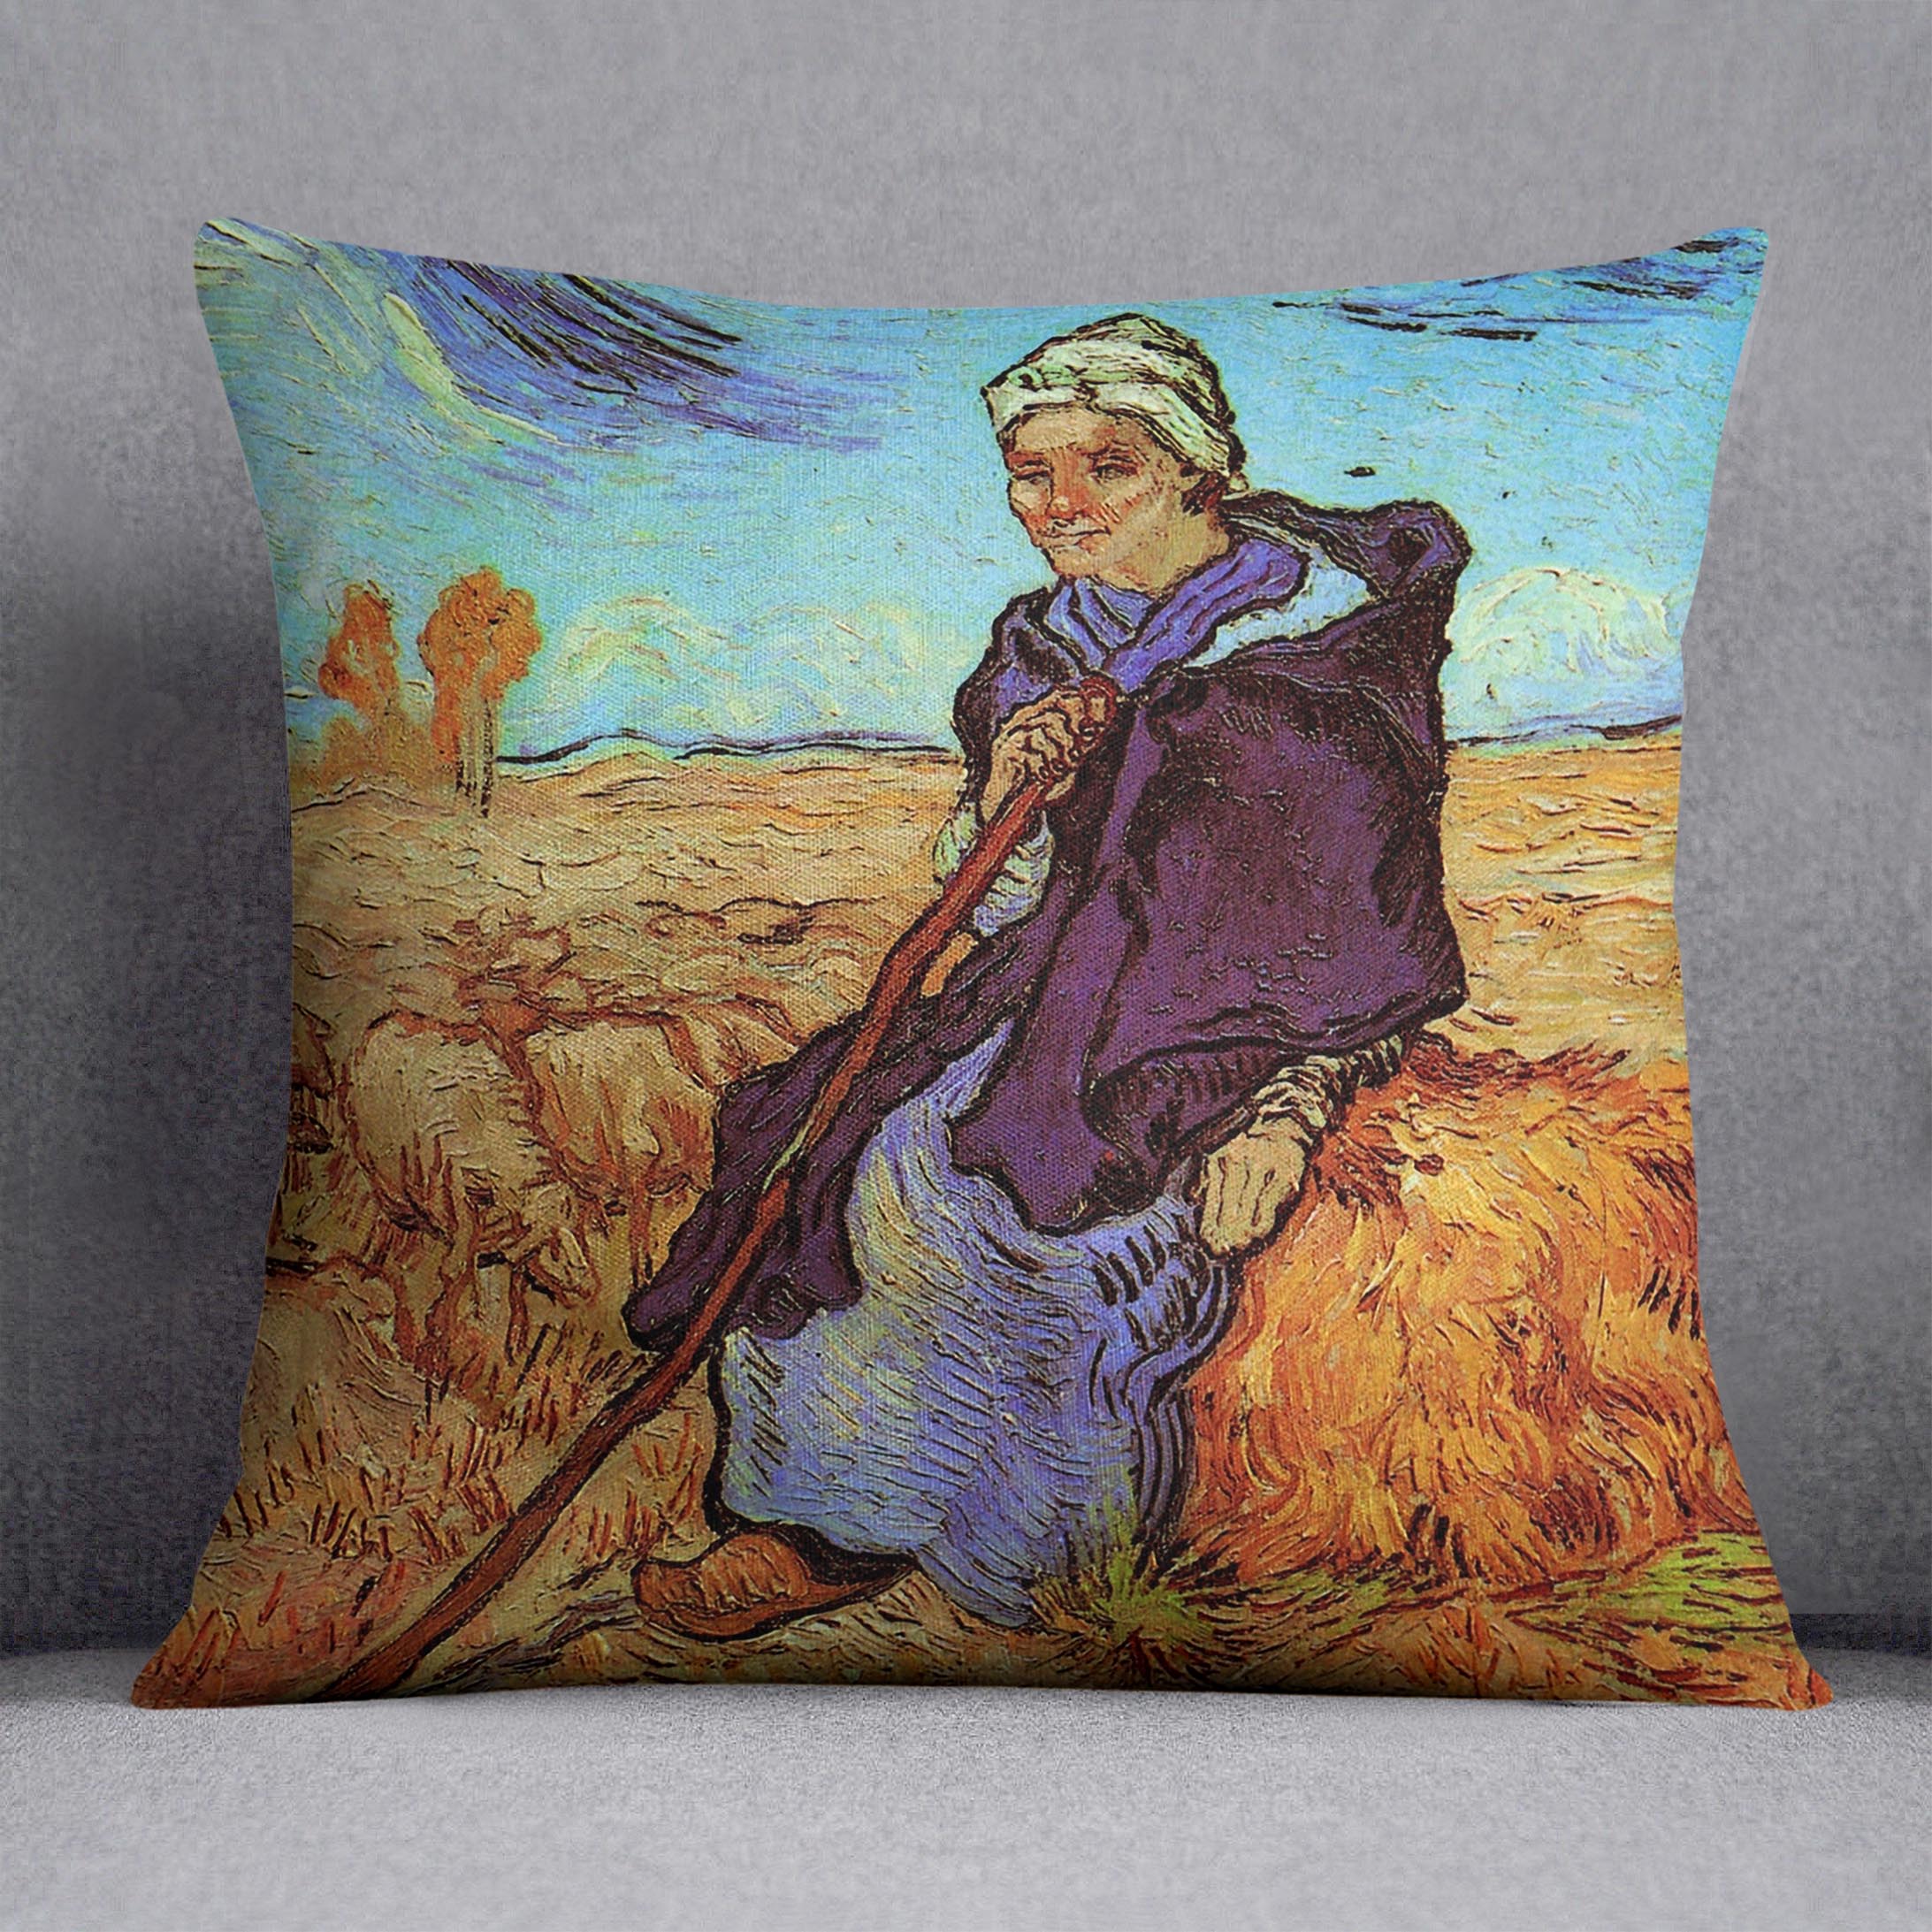 The Shepherdess after Millet by Van Gogh Cushion